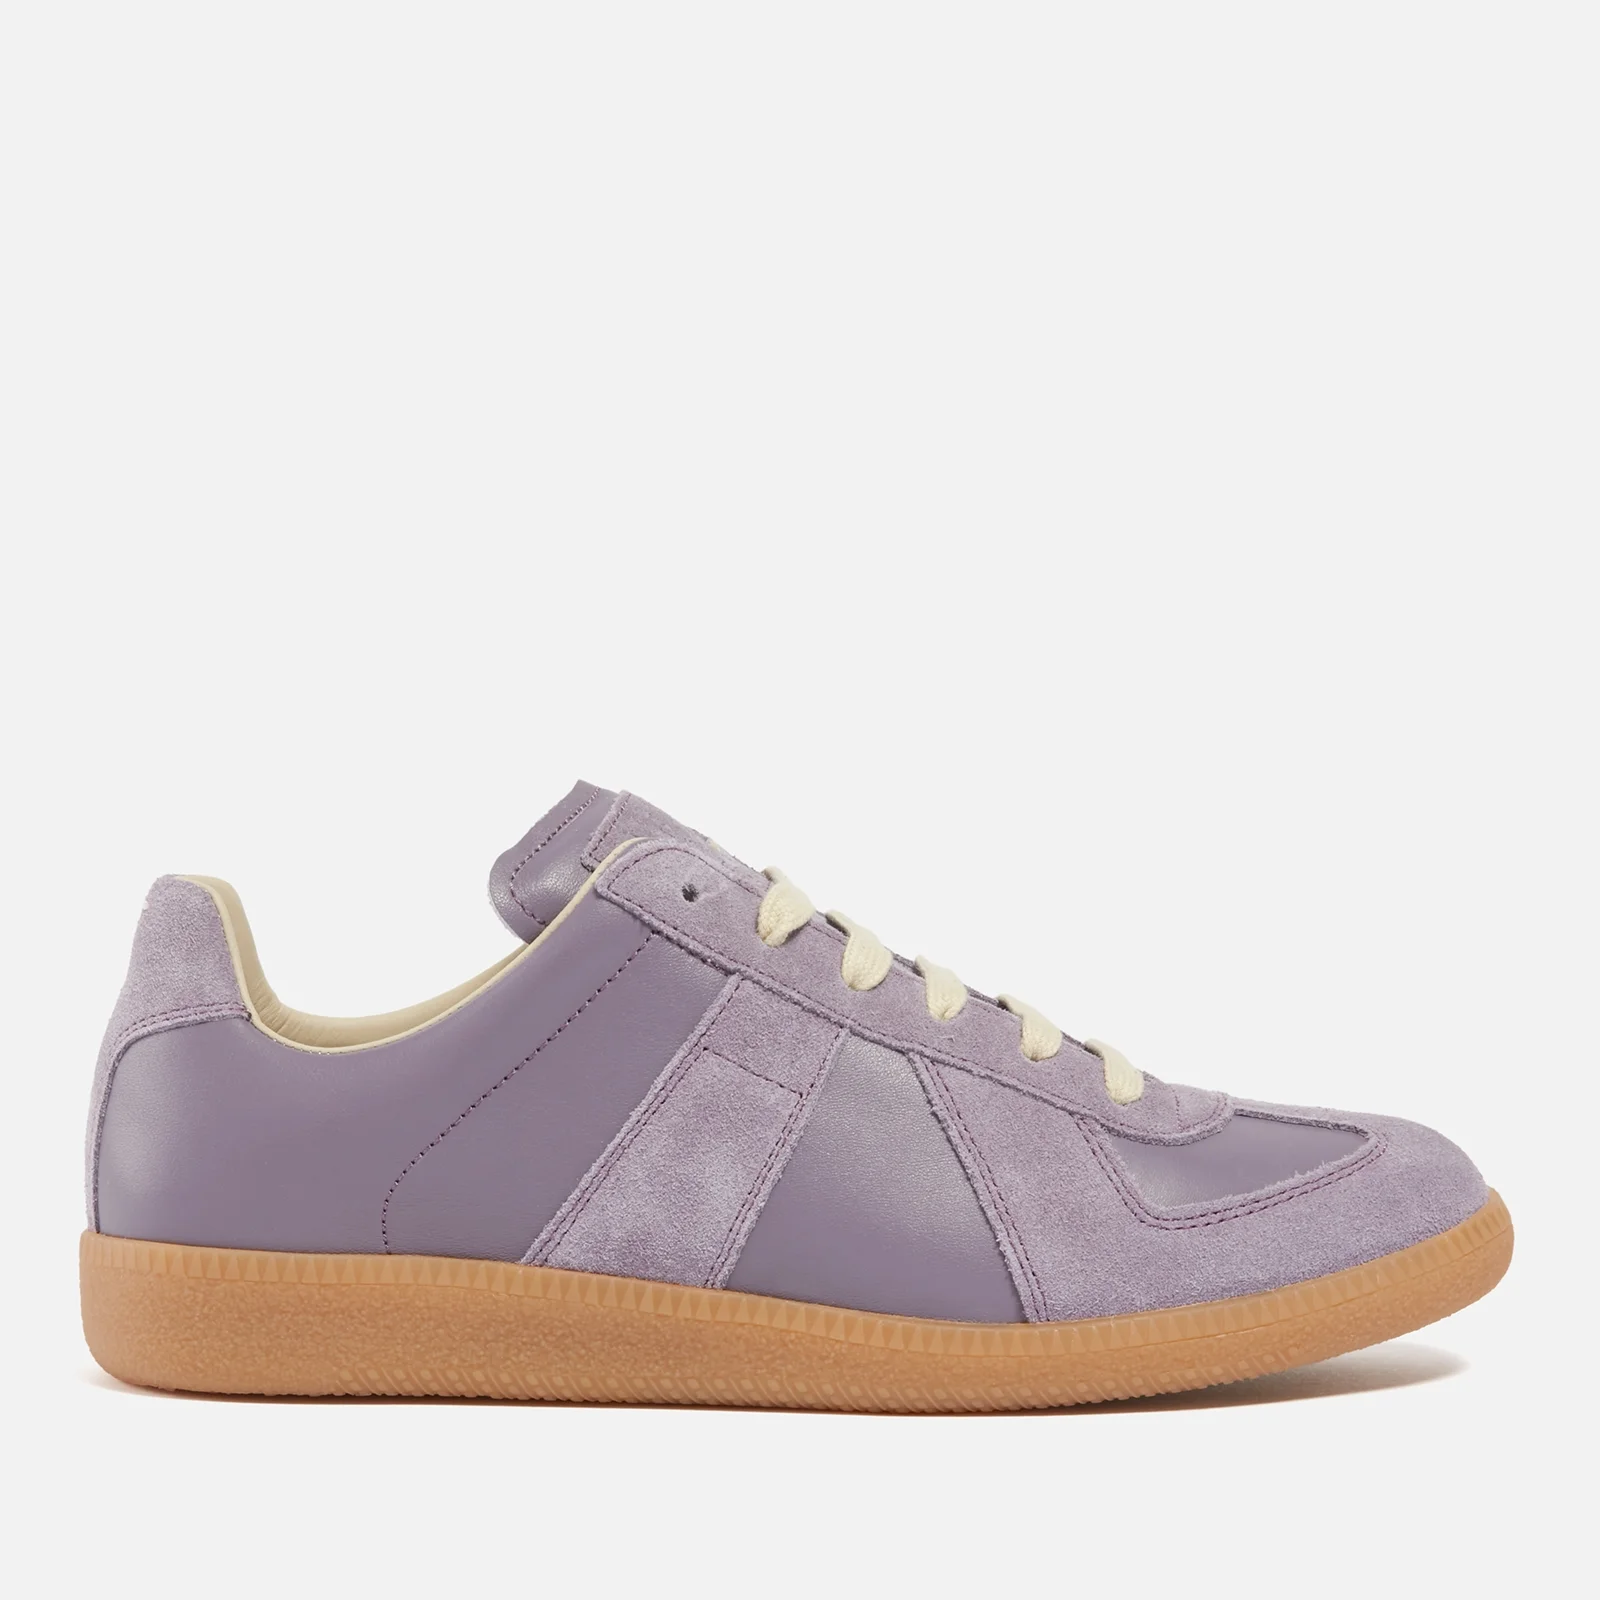 Maison Margiela Women's Suede and Leather Replica Trainers - UK 8 Image 1